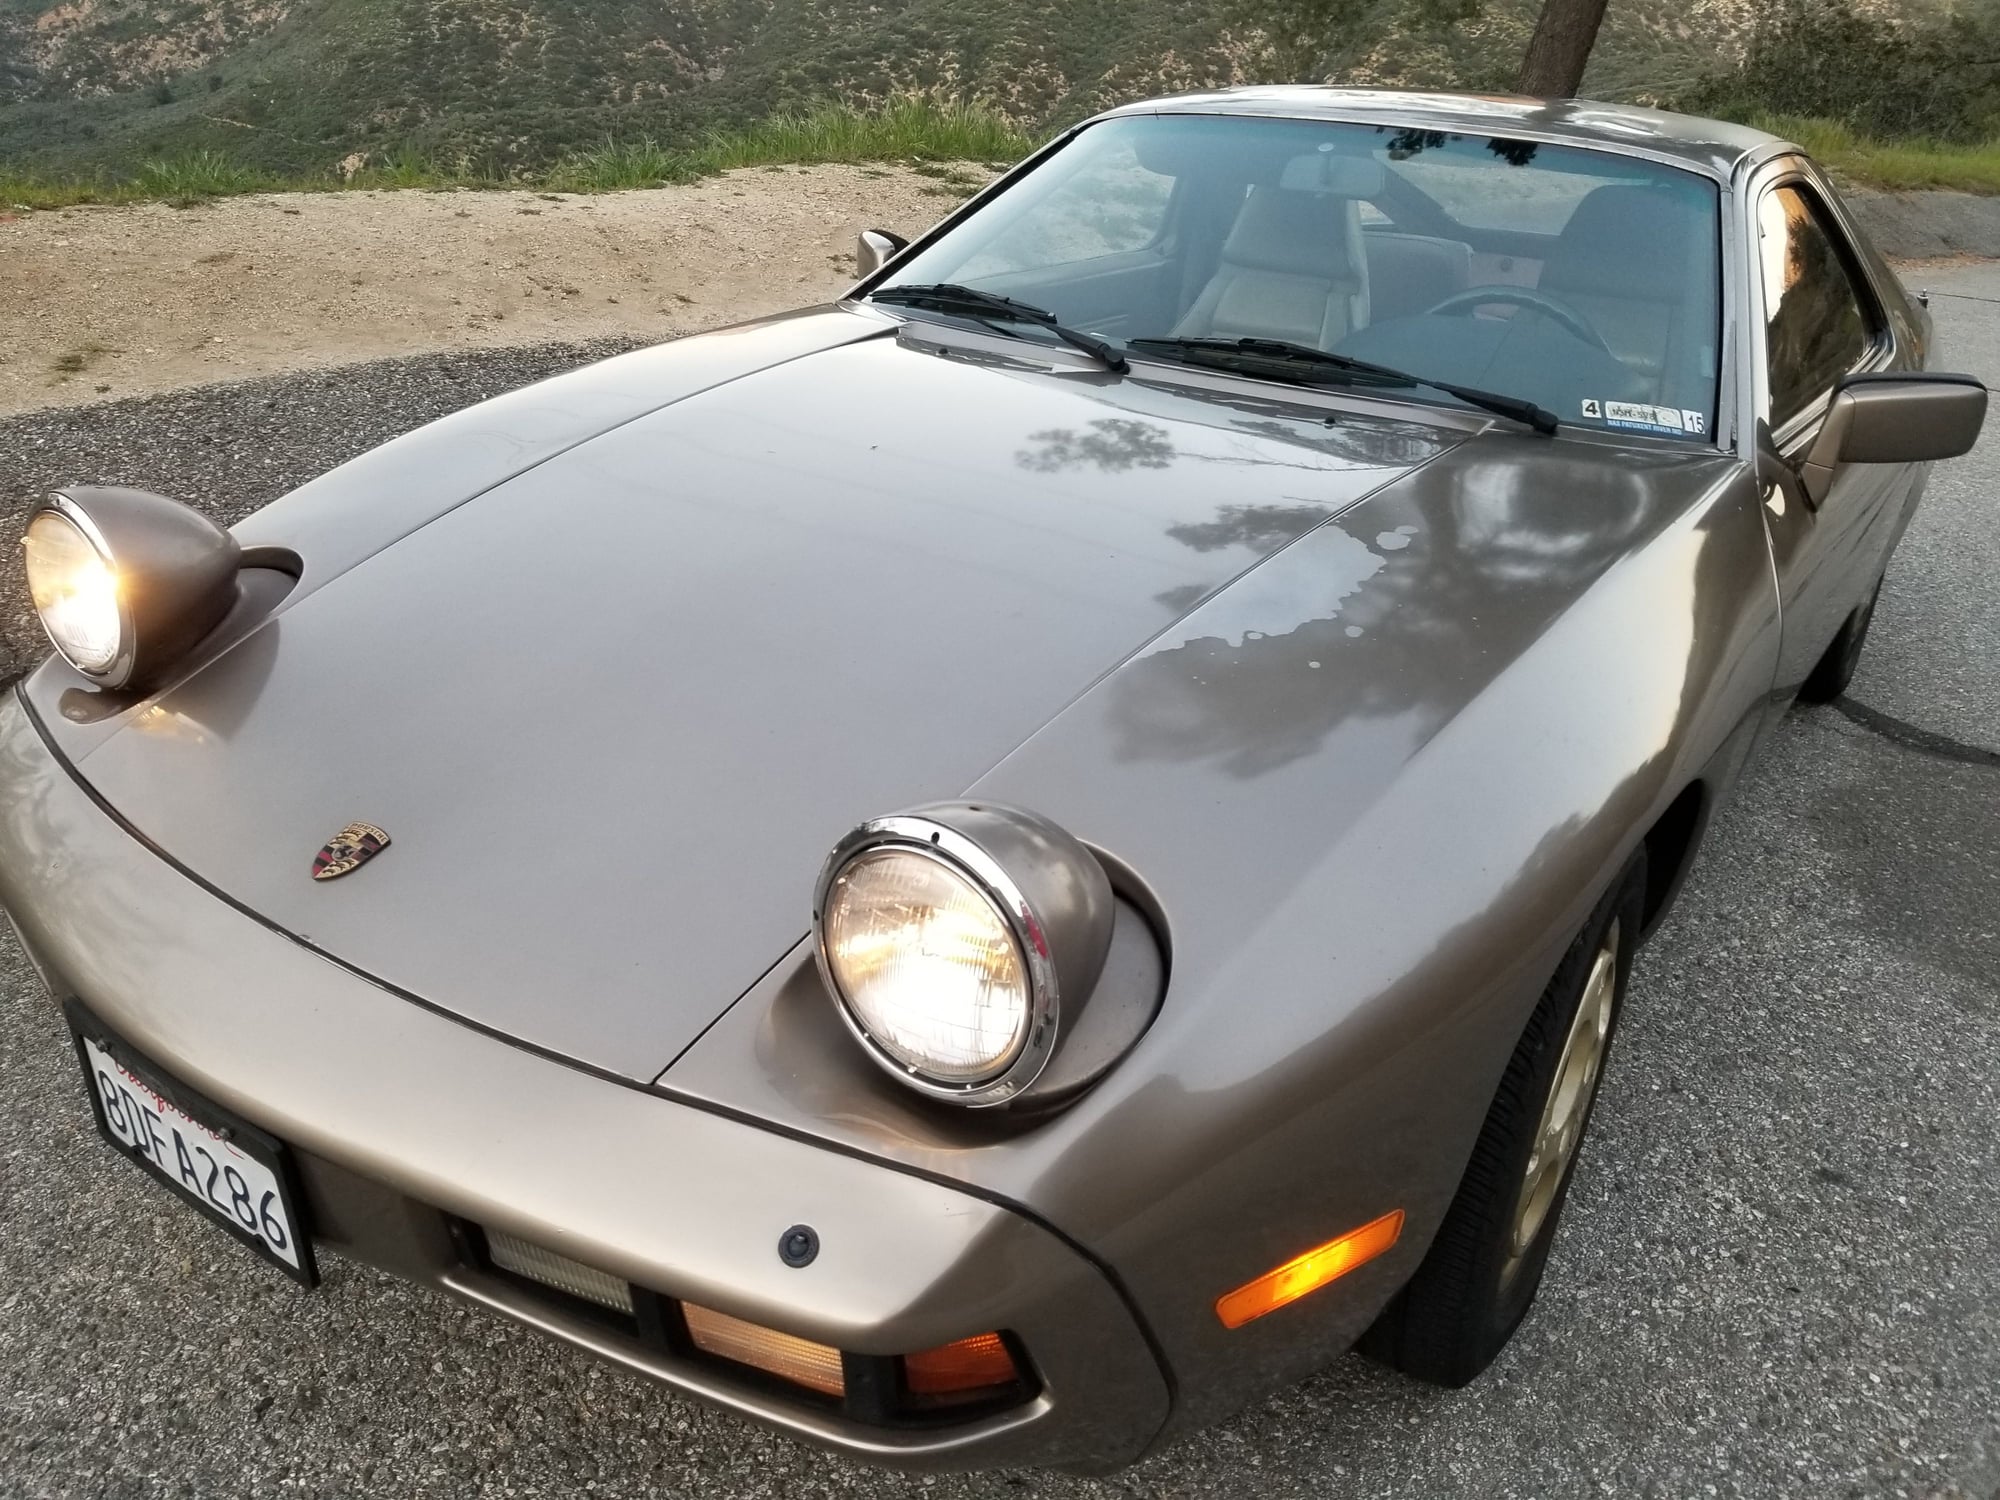 1981 Porsche 928 - 1981 Porsche 928 Auto 140k miles - Used - VIN WP0JA0920BS820334 - 140,800 Miles - 8 cyl - 4WD - Automatic - Coupe - Gold - South Pasadena, CA 91030, United States